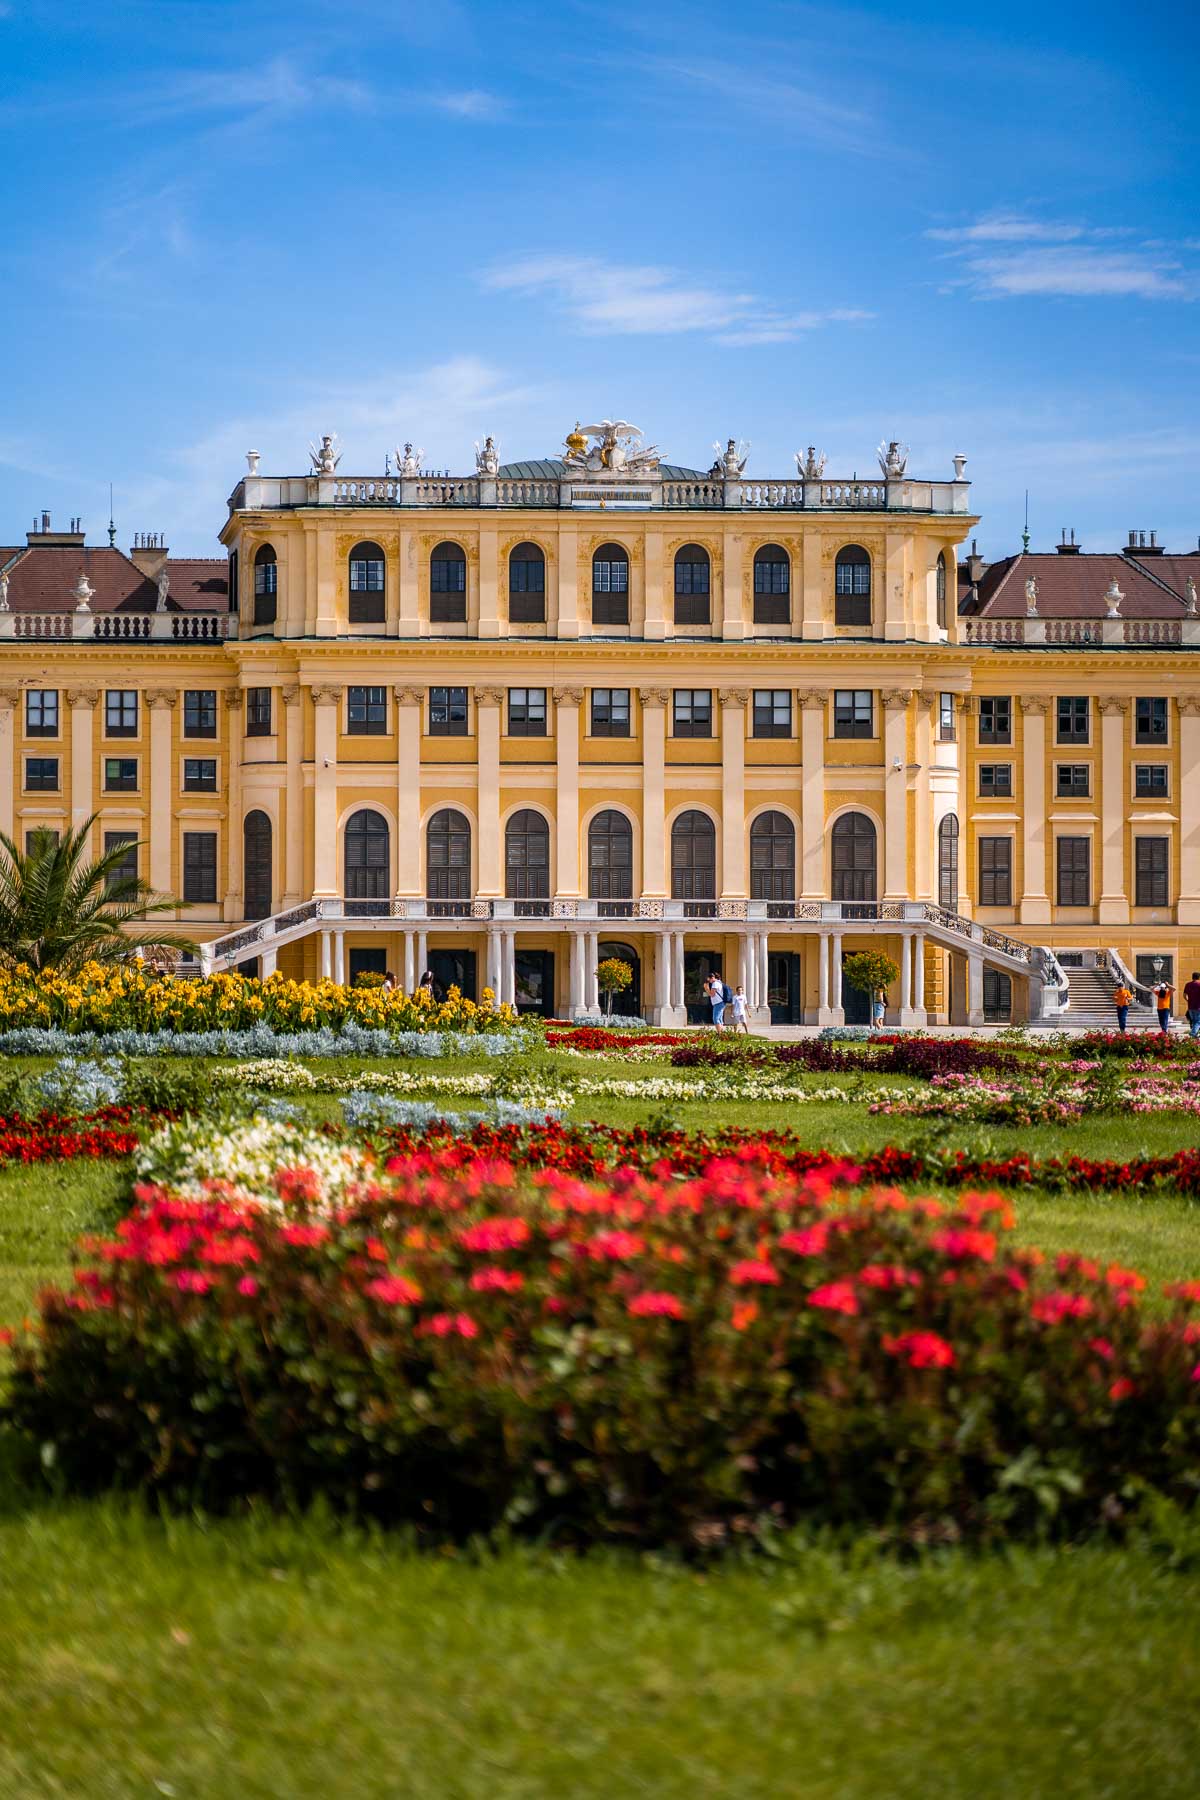 Schönbrunn Palace in Vienna with red flowers in the foreground